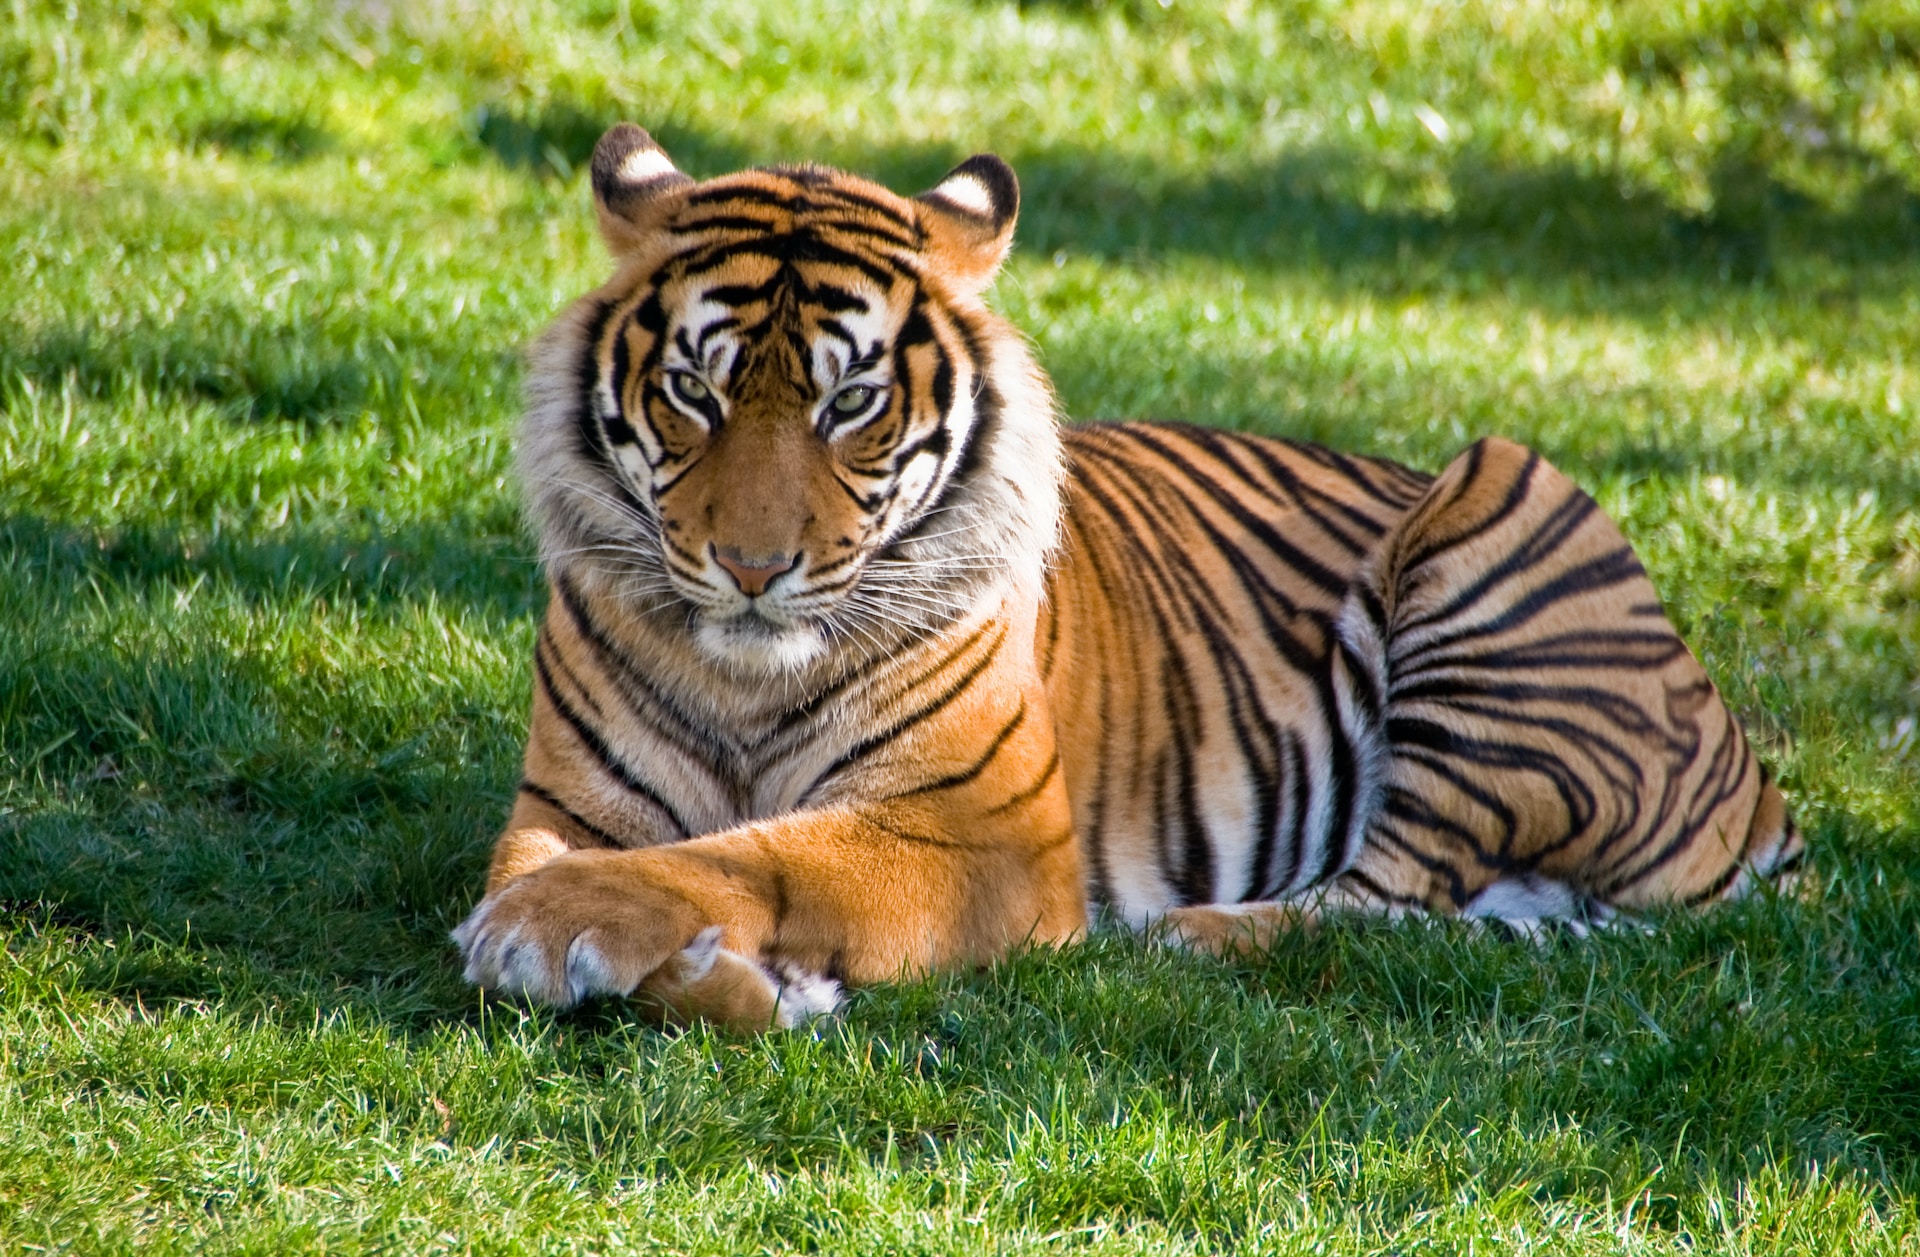 10 Fascinating Facts About Tigers